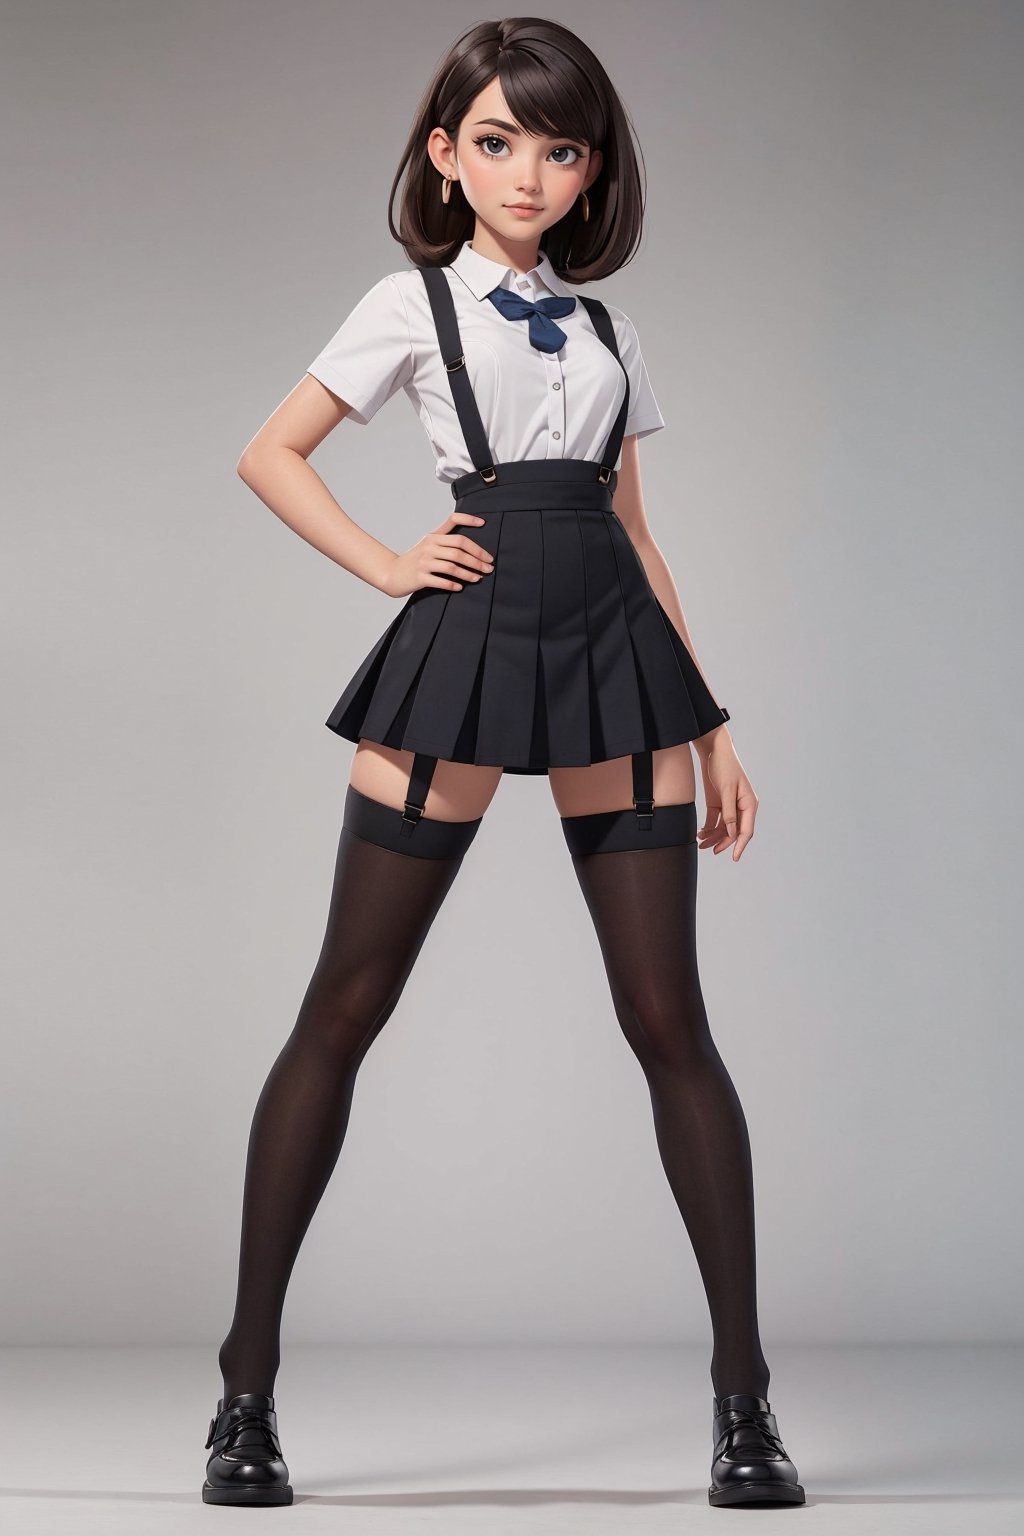 character sheet, student clothes, beautiful, good hands, full body, looking to the camera, good body, 18 year old girl body, school shoes, school skirt, school shirt, black shoes, sexy pose, full_body, with small earrings, character_sheet, fashionable hairstyle, school_uniform, shoes_black, with  school_shoes_black, arcane style, clothes with accessories, denier tights in beige, stockings_colorbeige, Reclaimed Vintage side cut out tights in black, clothes sexy, Bluebella garter suspender in black,brown hair, straight hair, fair skin, light eyes